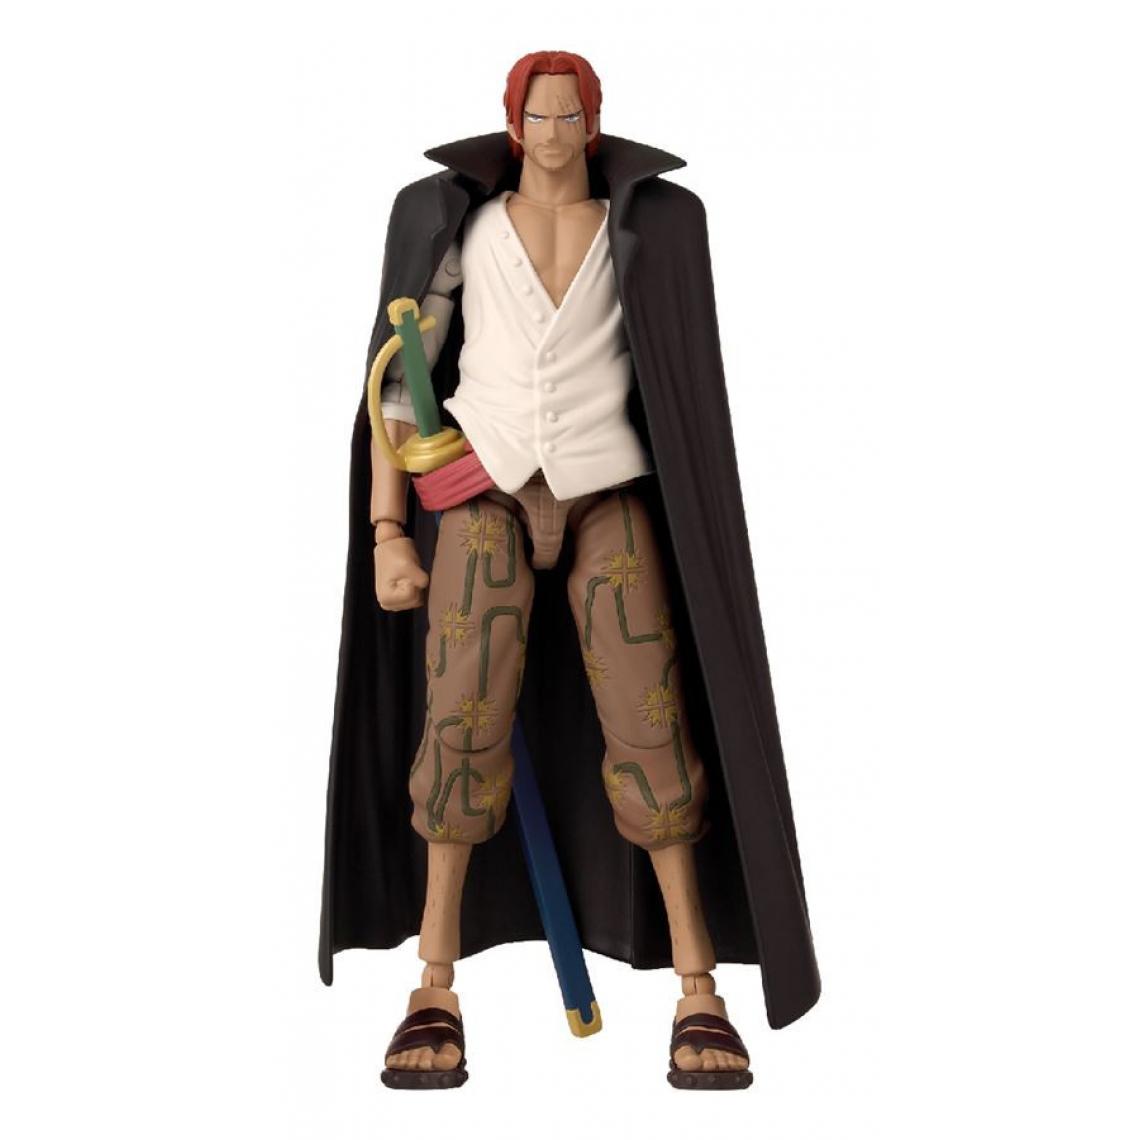 Editions Animees - Figurine Anime Heroes One Piece Shanks - Animaux